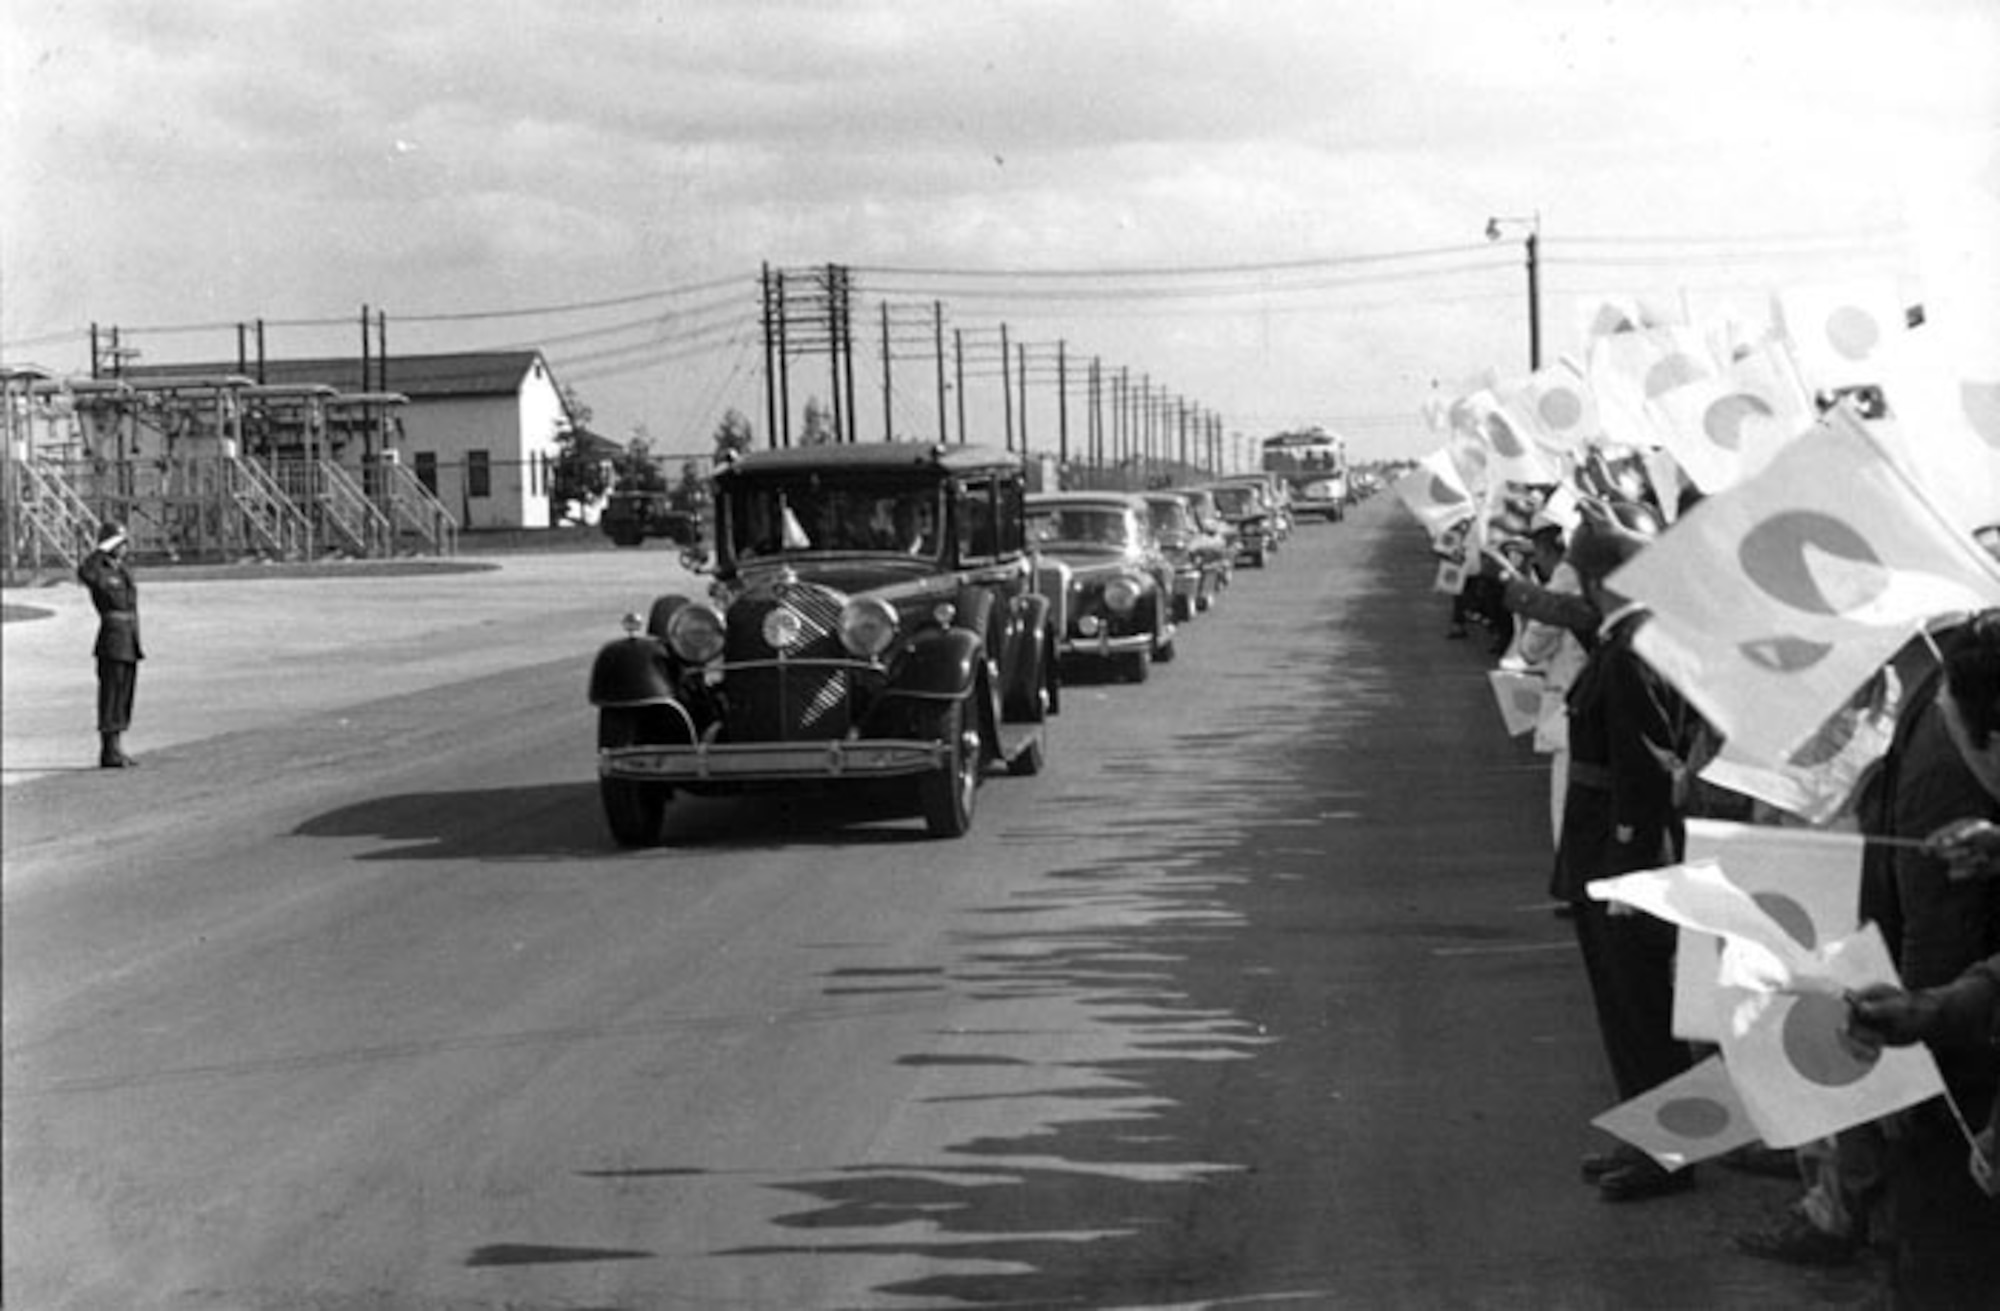 630522-MISAWA AIR BASE, Japan -- The Imperial royal motorcade carrying the Emperor and Empress heads down Friendship Boulevard toward the Misawa AB flightline.  (Photo by Irv Silberman)